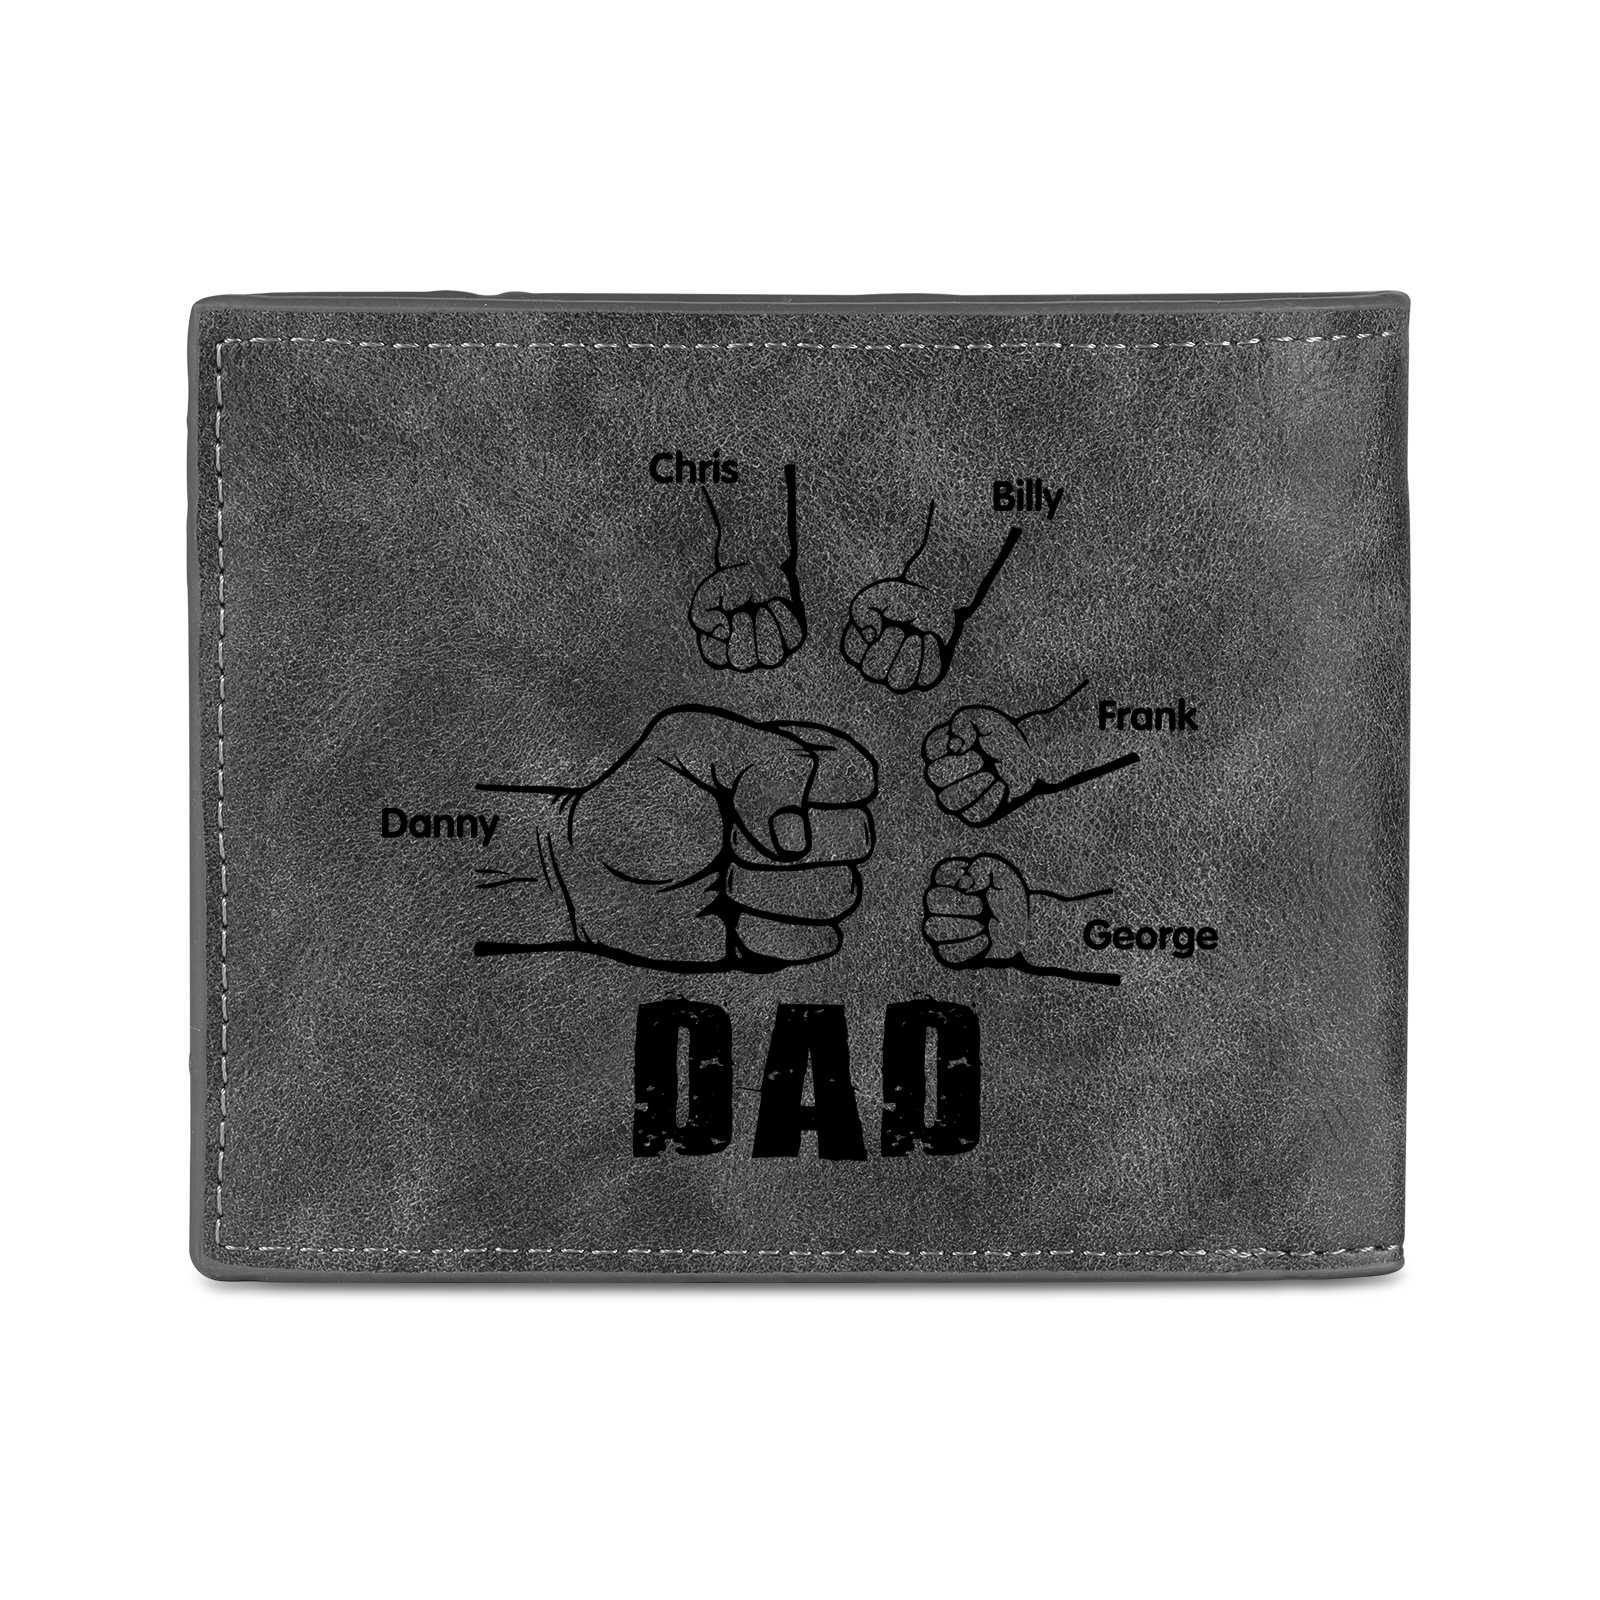 5 Names - Personalized Photo Custom Leather Men's Wallet as a Father's Day Gift for Dad